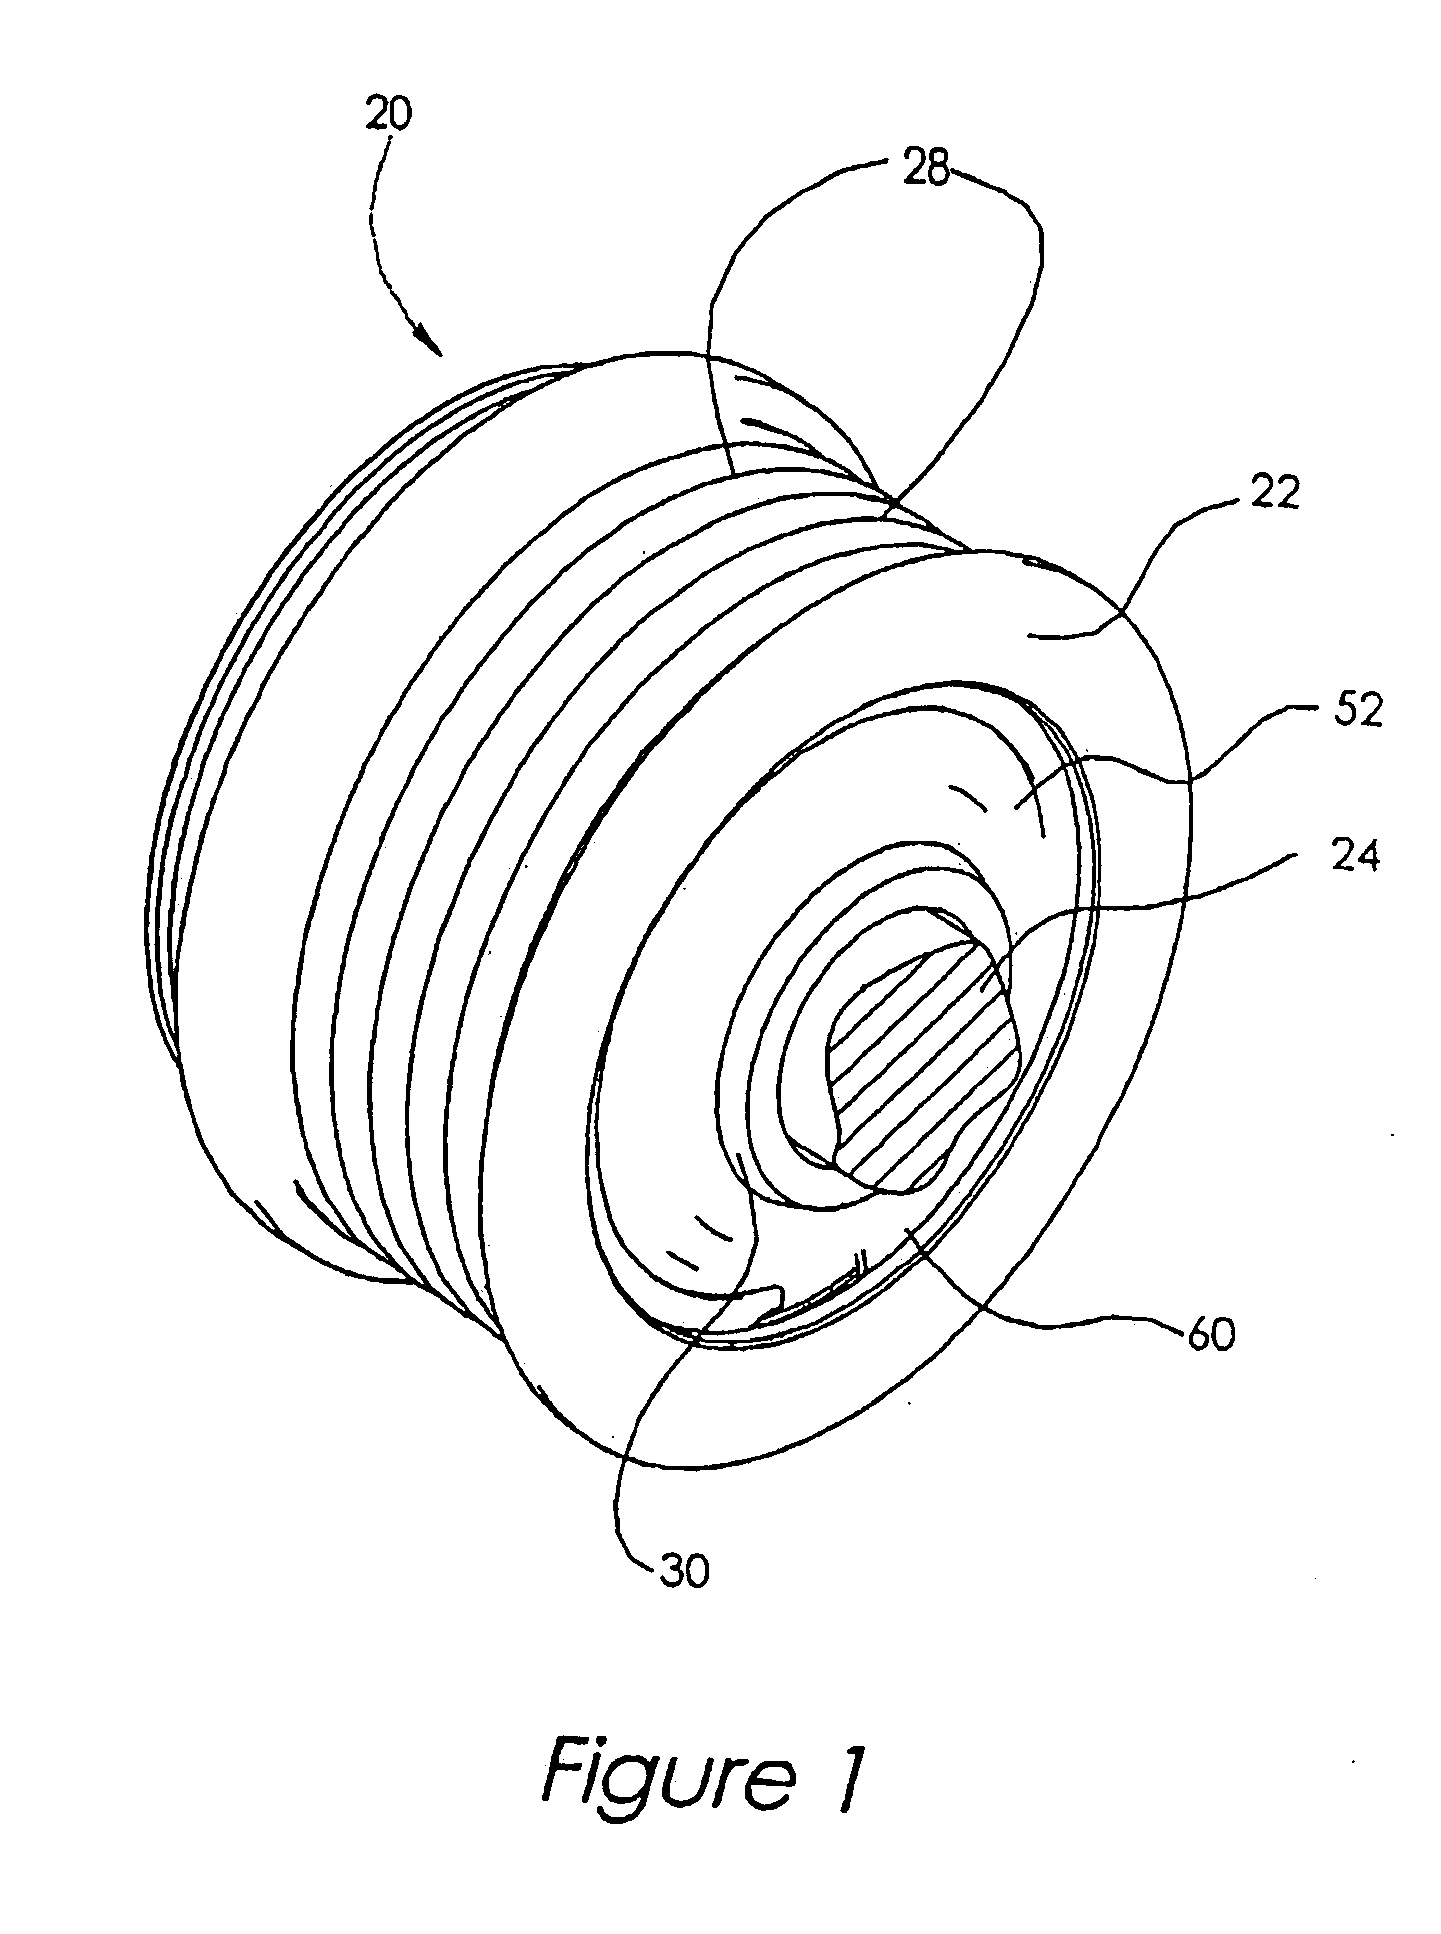 Polymer spring controlled pulley assembly for rotary devices